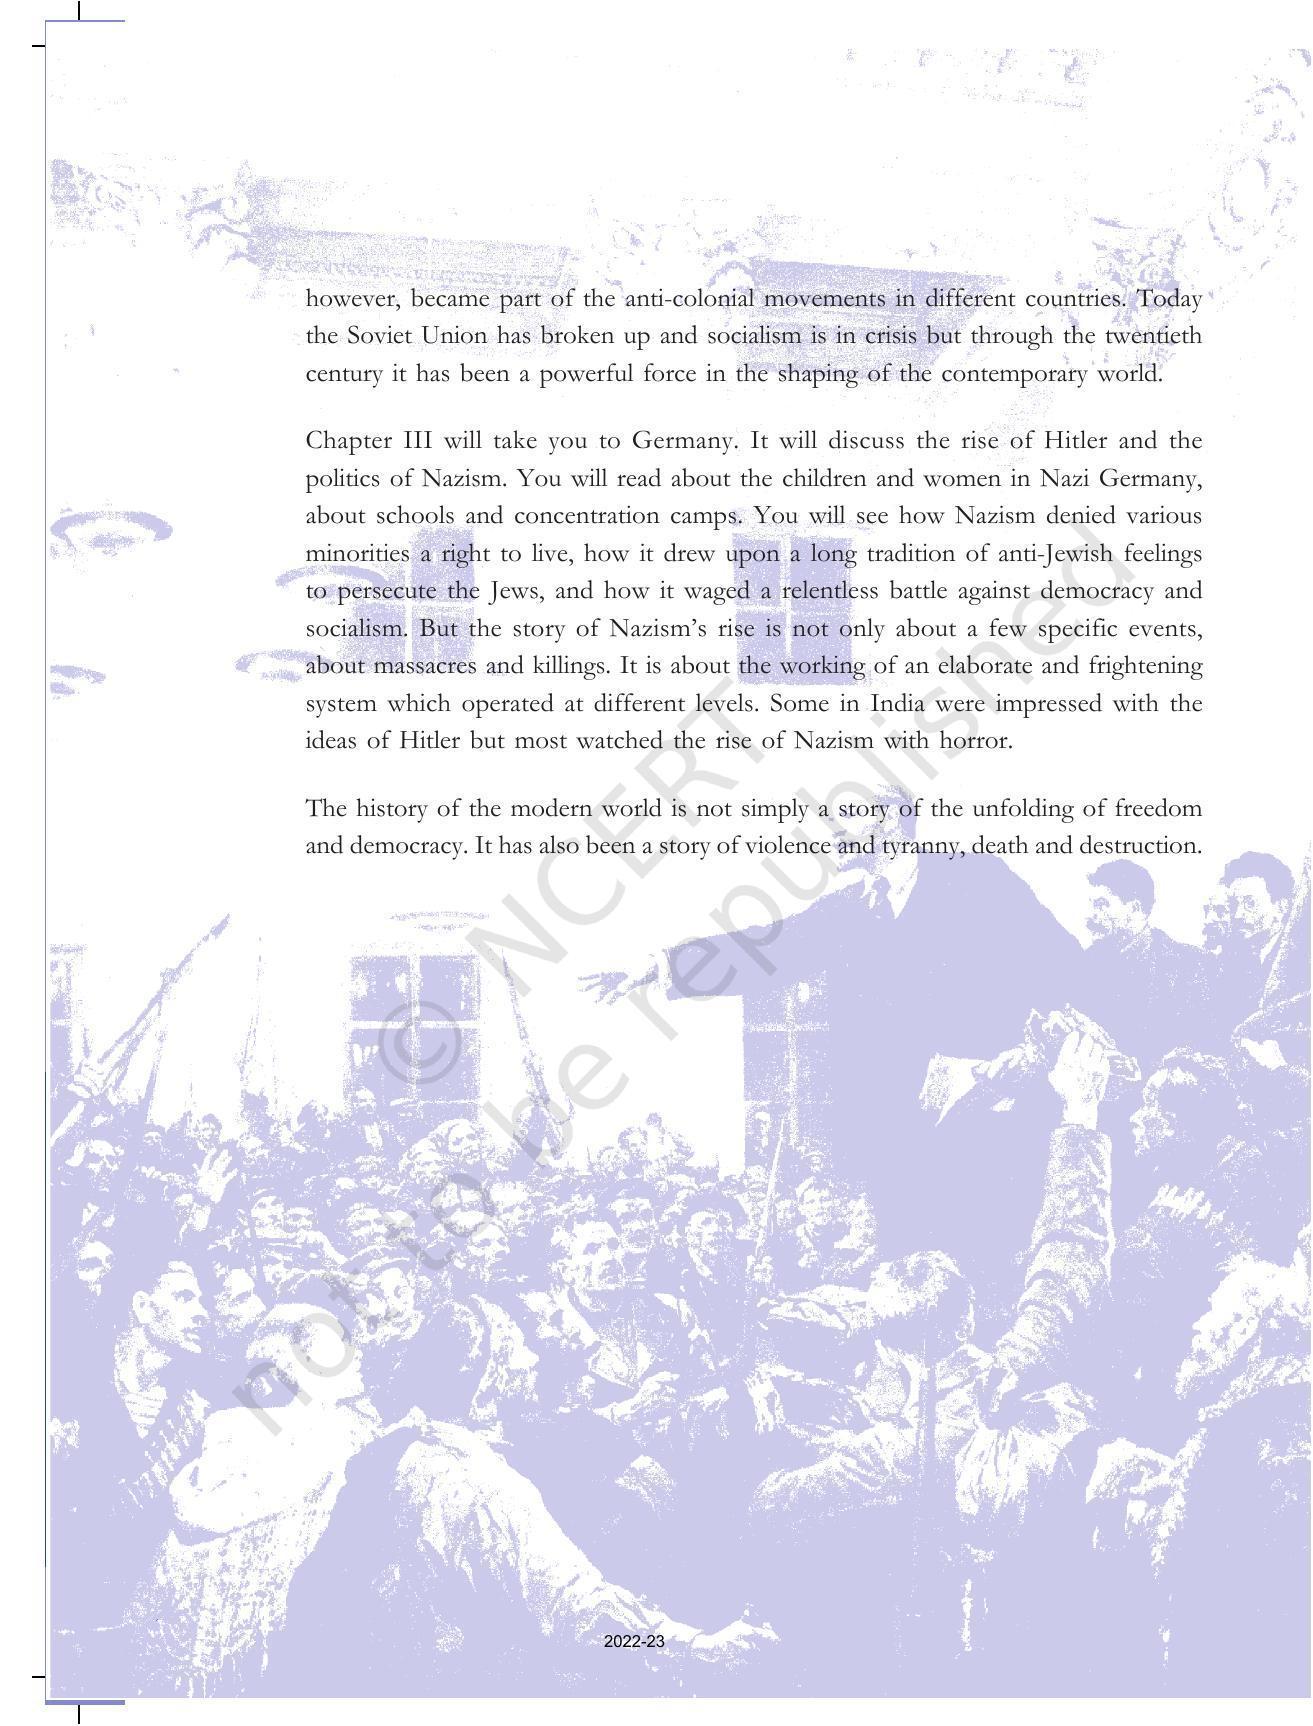 NCERT Book for Class 9 History Chapter 1 The French Revolution - Page 2